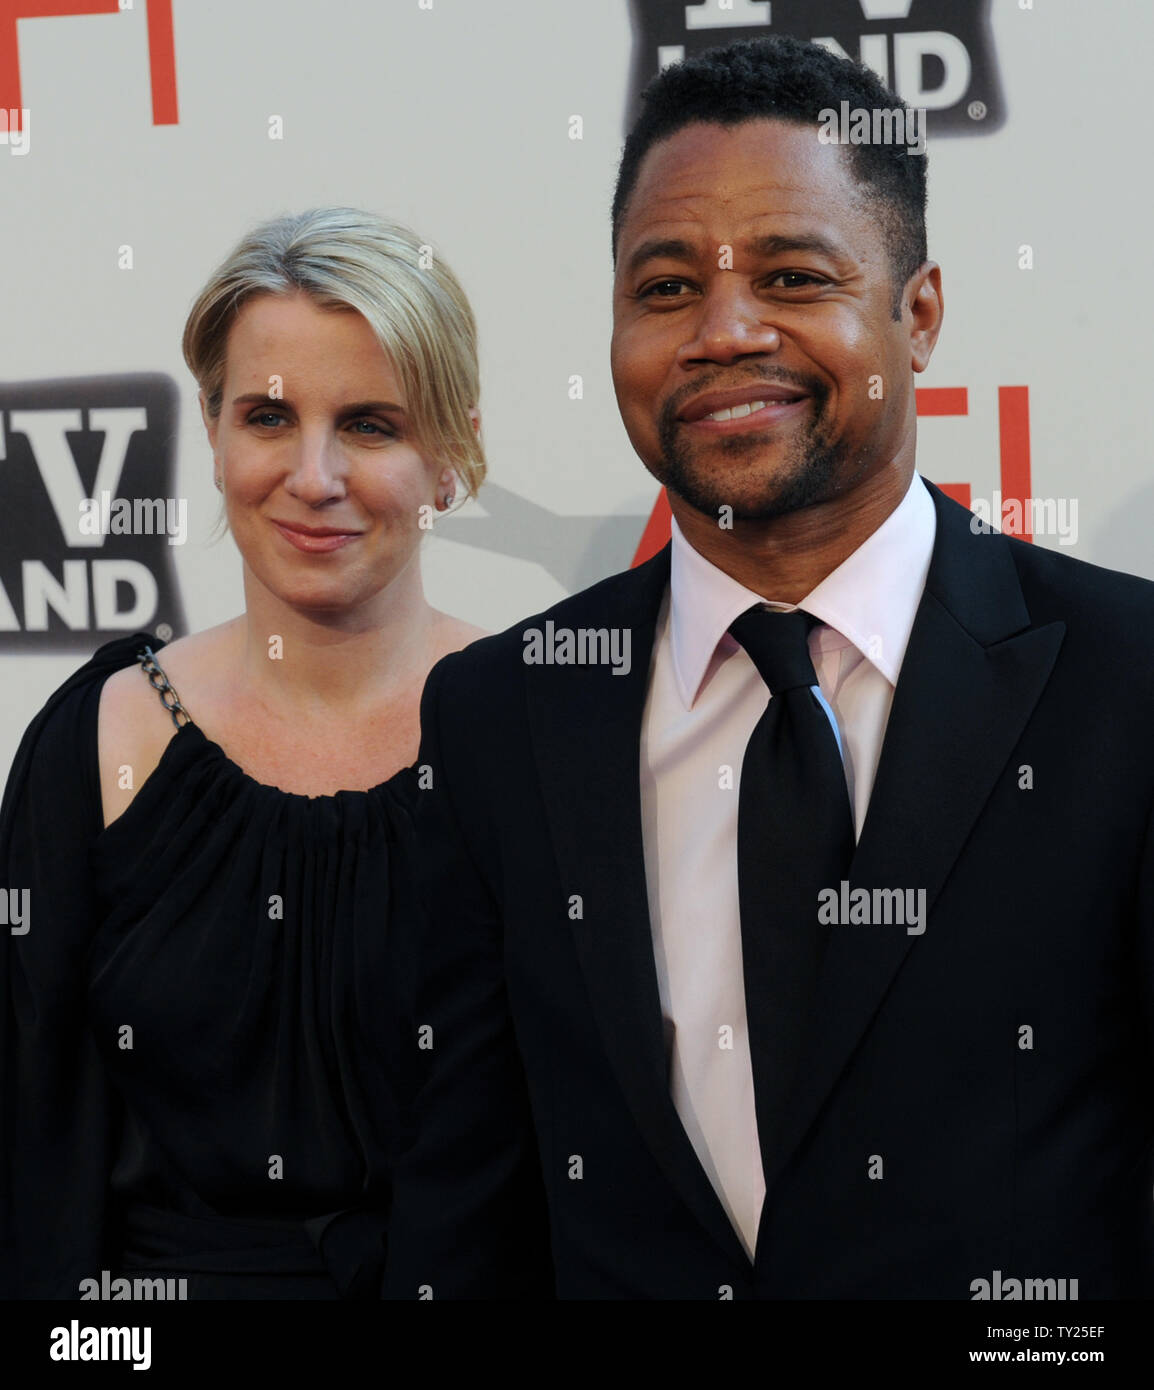 Actor Cuba Gooding Jr. and his wife Sara Kapfer arrive for the taping of 'TV Land Presents: AFI Life Achievement Award Honoring Morgan Freeman', at Sony Studios in Culver City, California on June 9, 2011. The special will air June 19th on TV Land.  UPI/Jim Ruymen Stock Photo